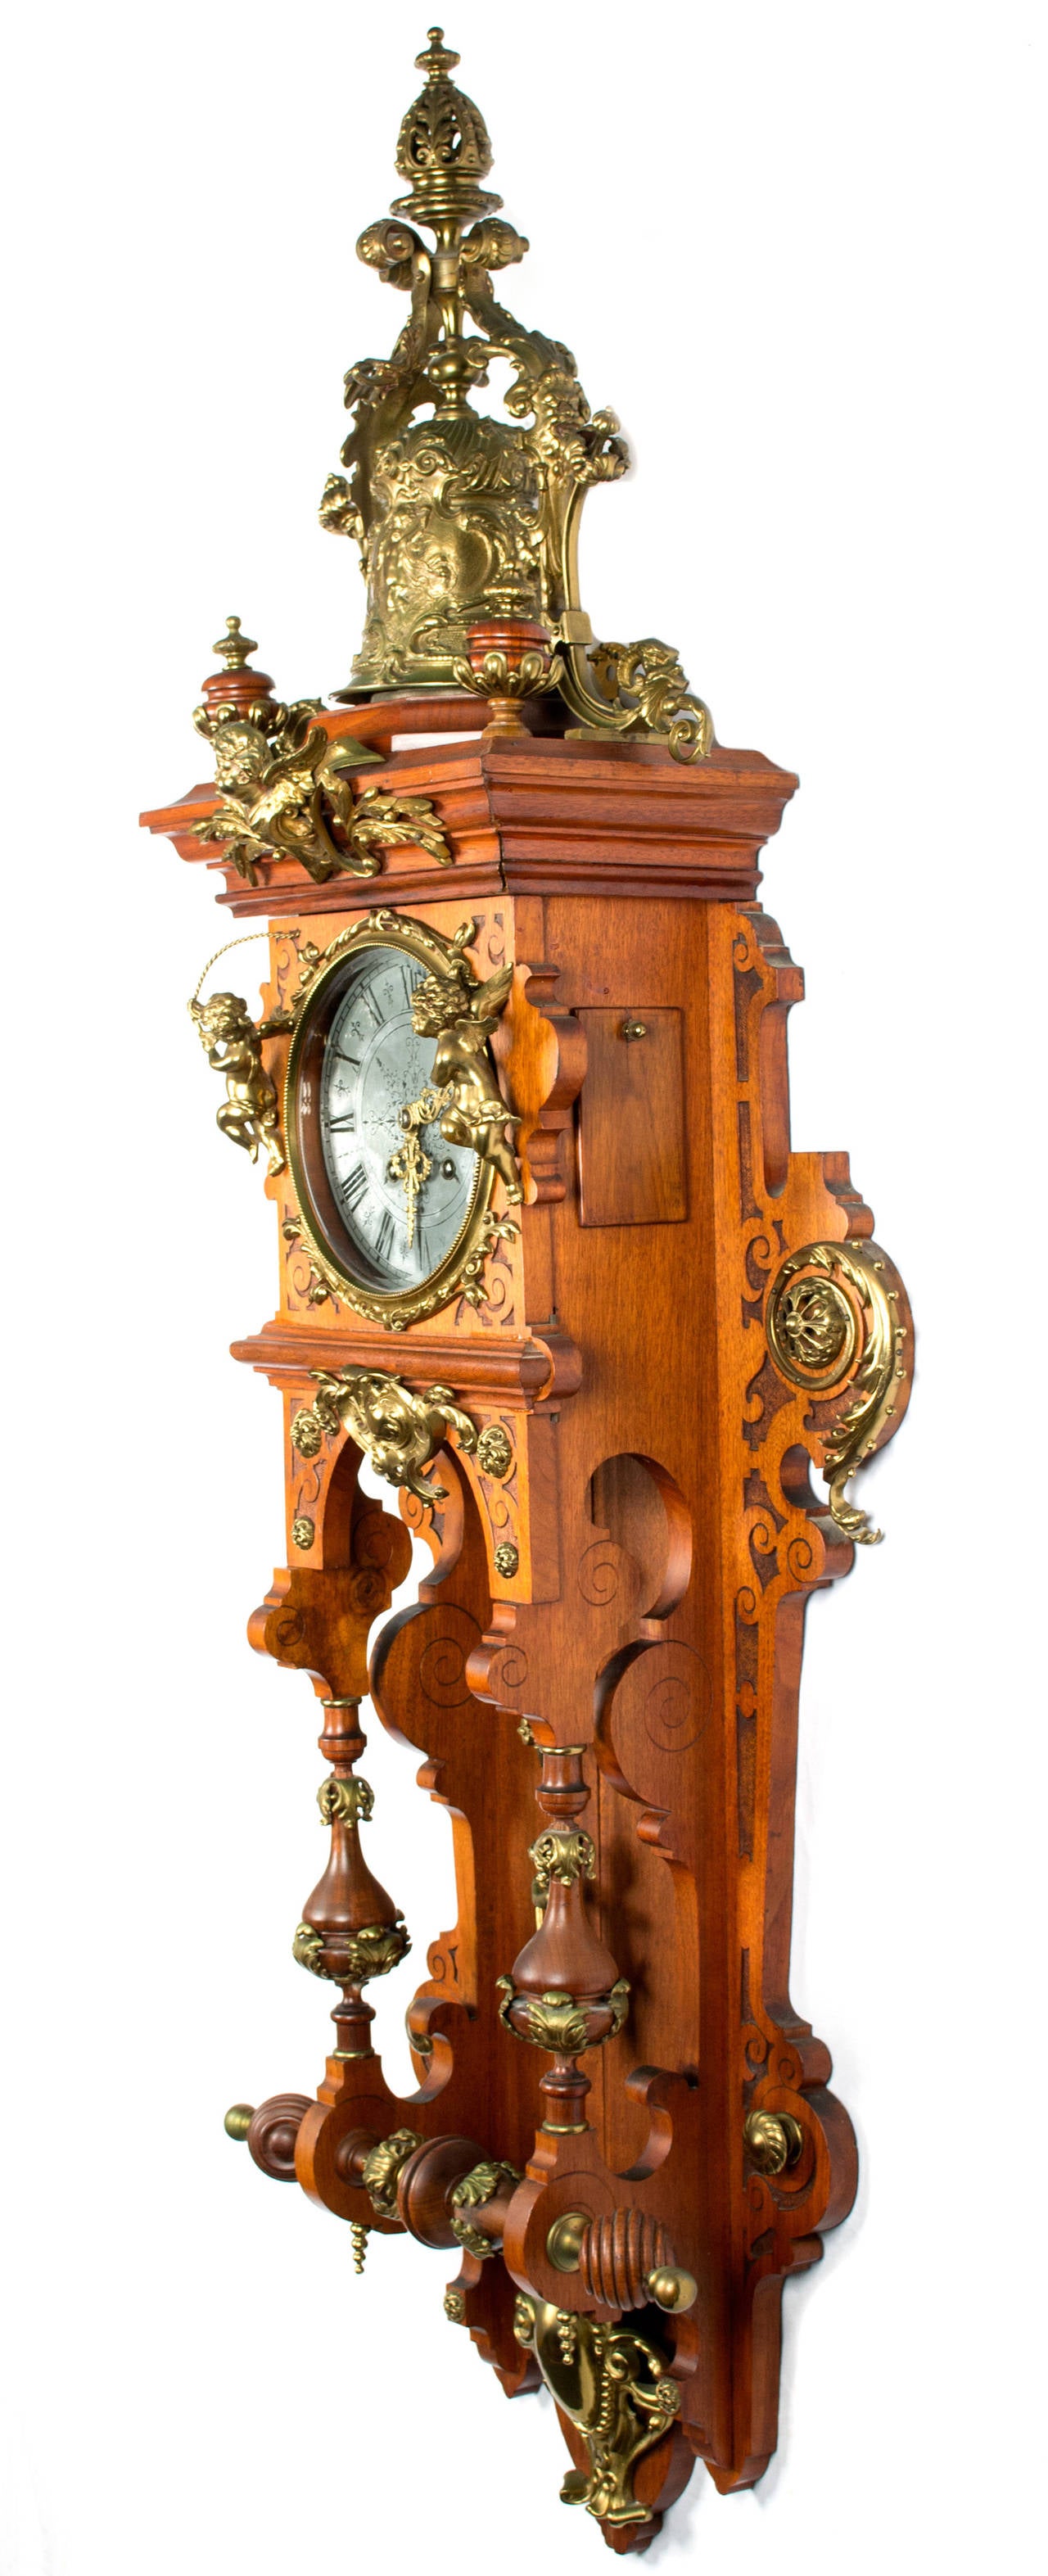 With a carved oak case intricate brass and pewter works, this German clock was made post-war in the Beaux-Arts style.